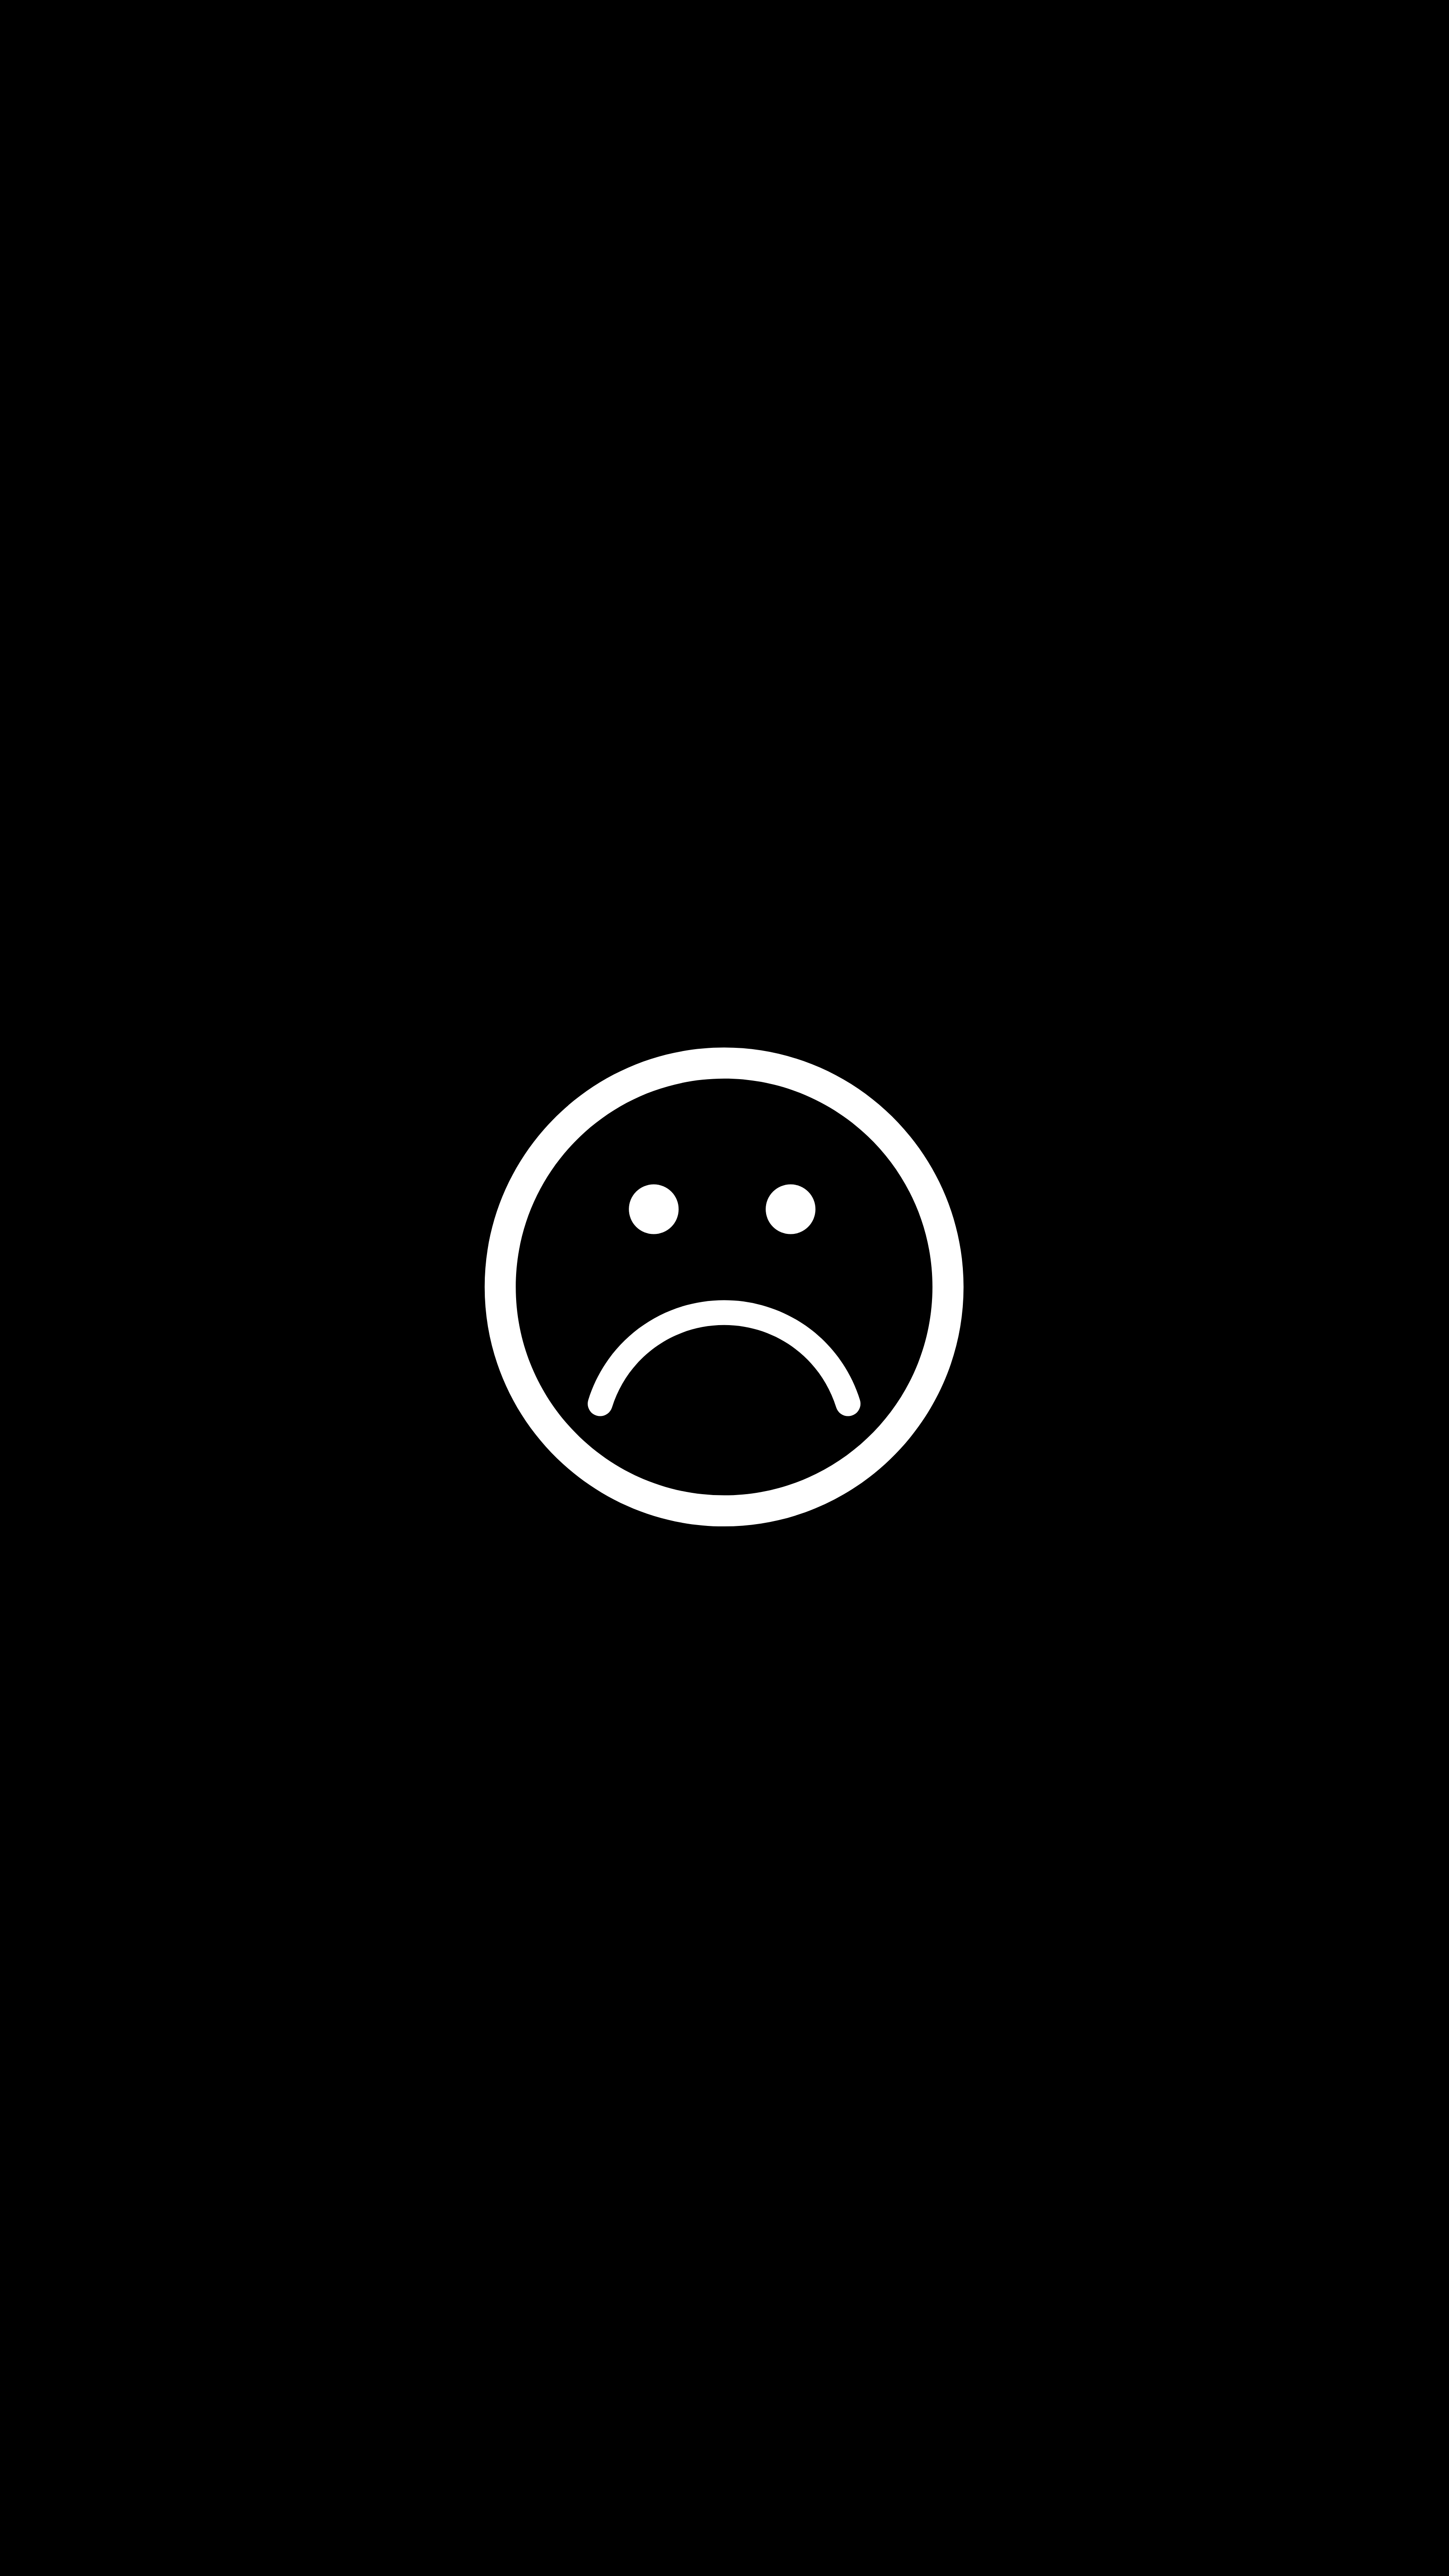 62040 download wallpaper vector, smile, bw, chb, sad, emoticon, smiley screensavers and pictures for free